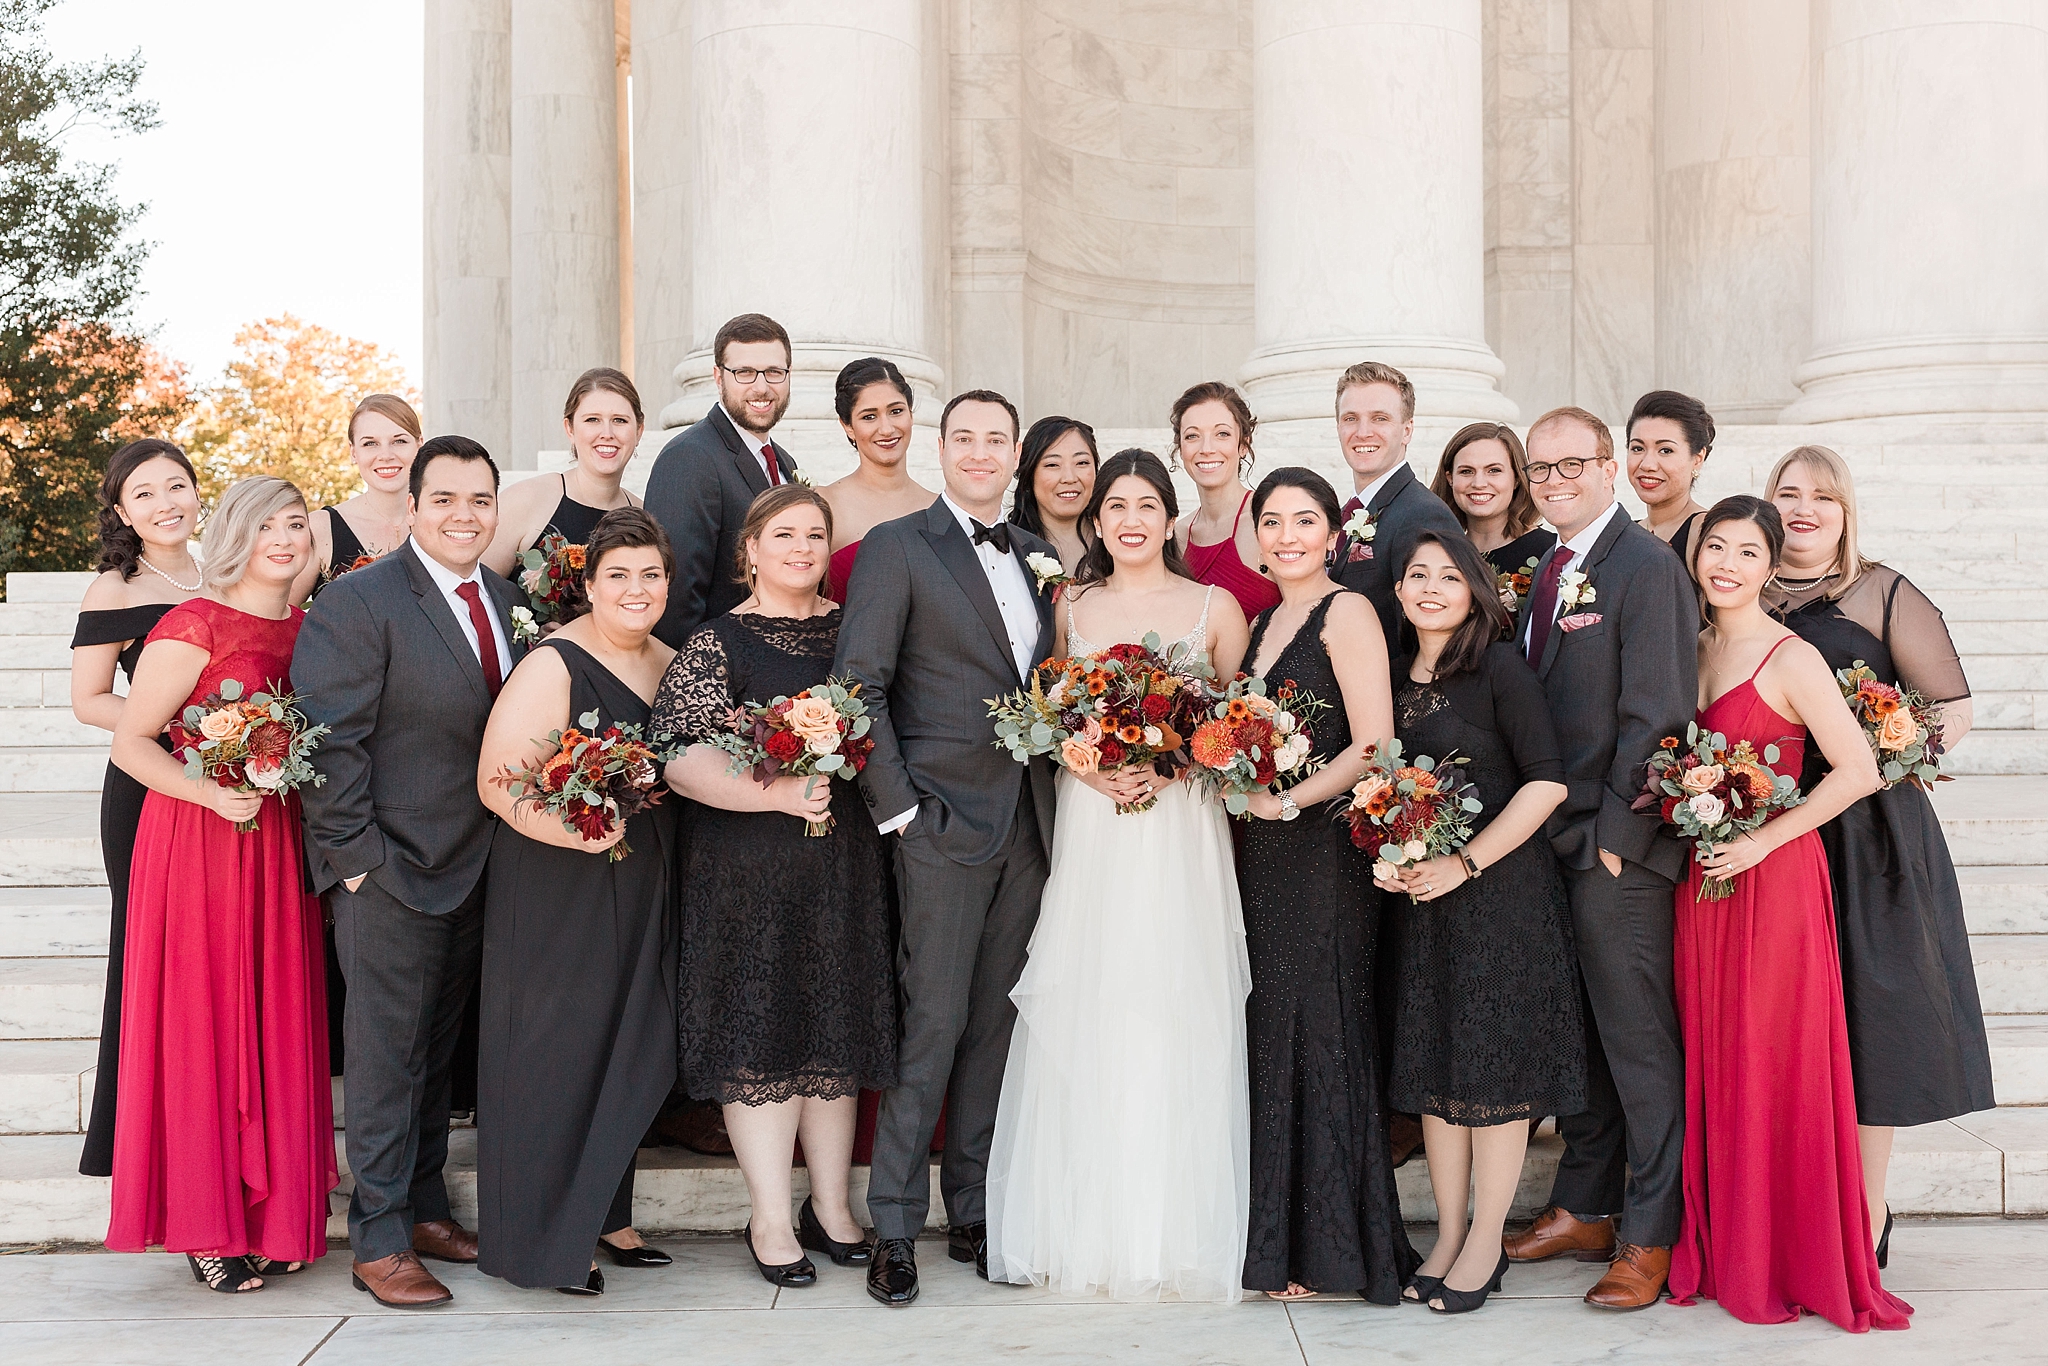 A stunning fall wedding at District Winery in Washington, DC.